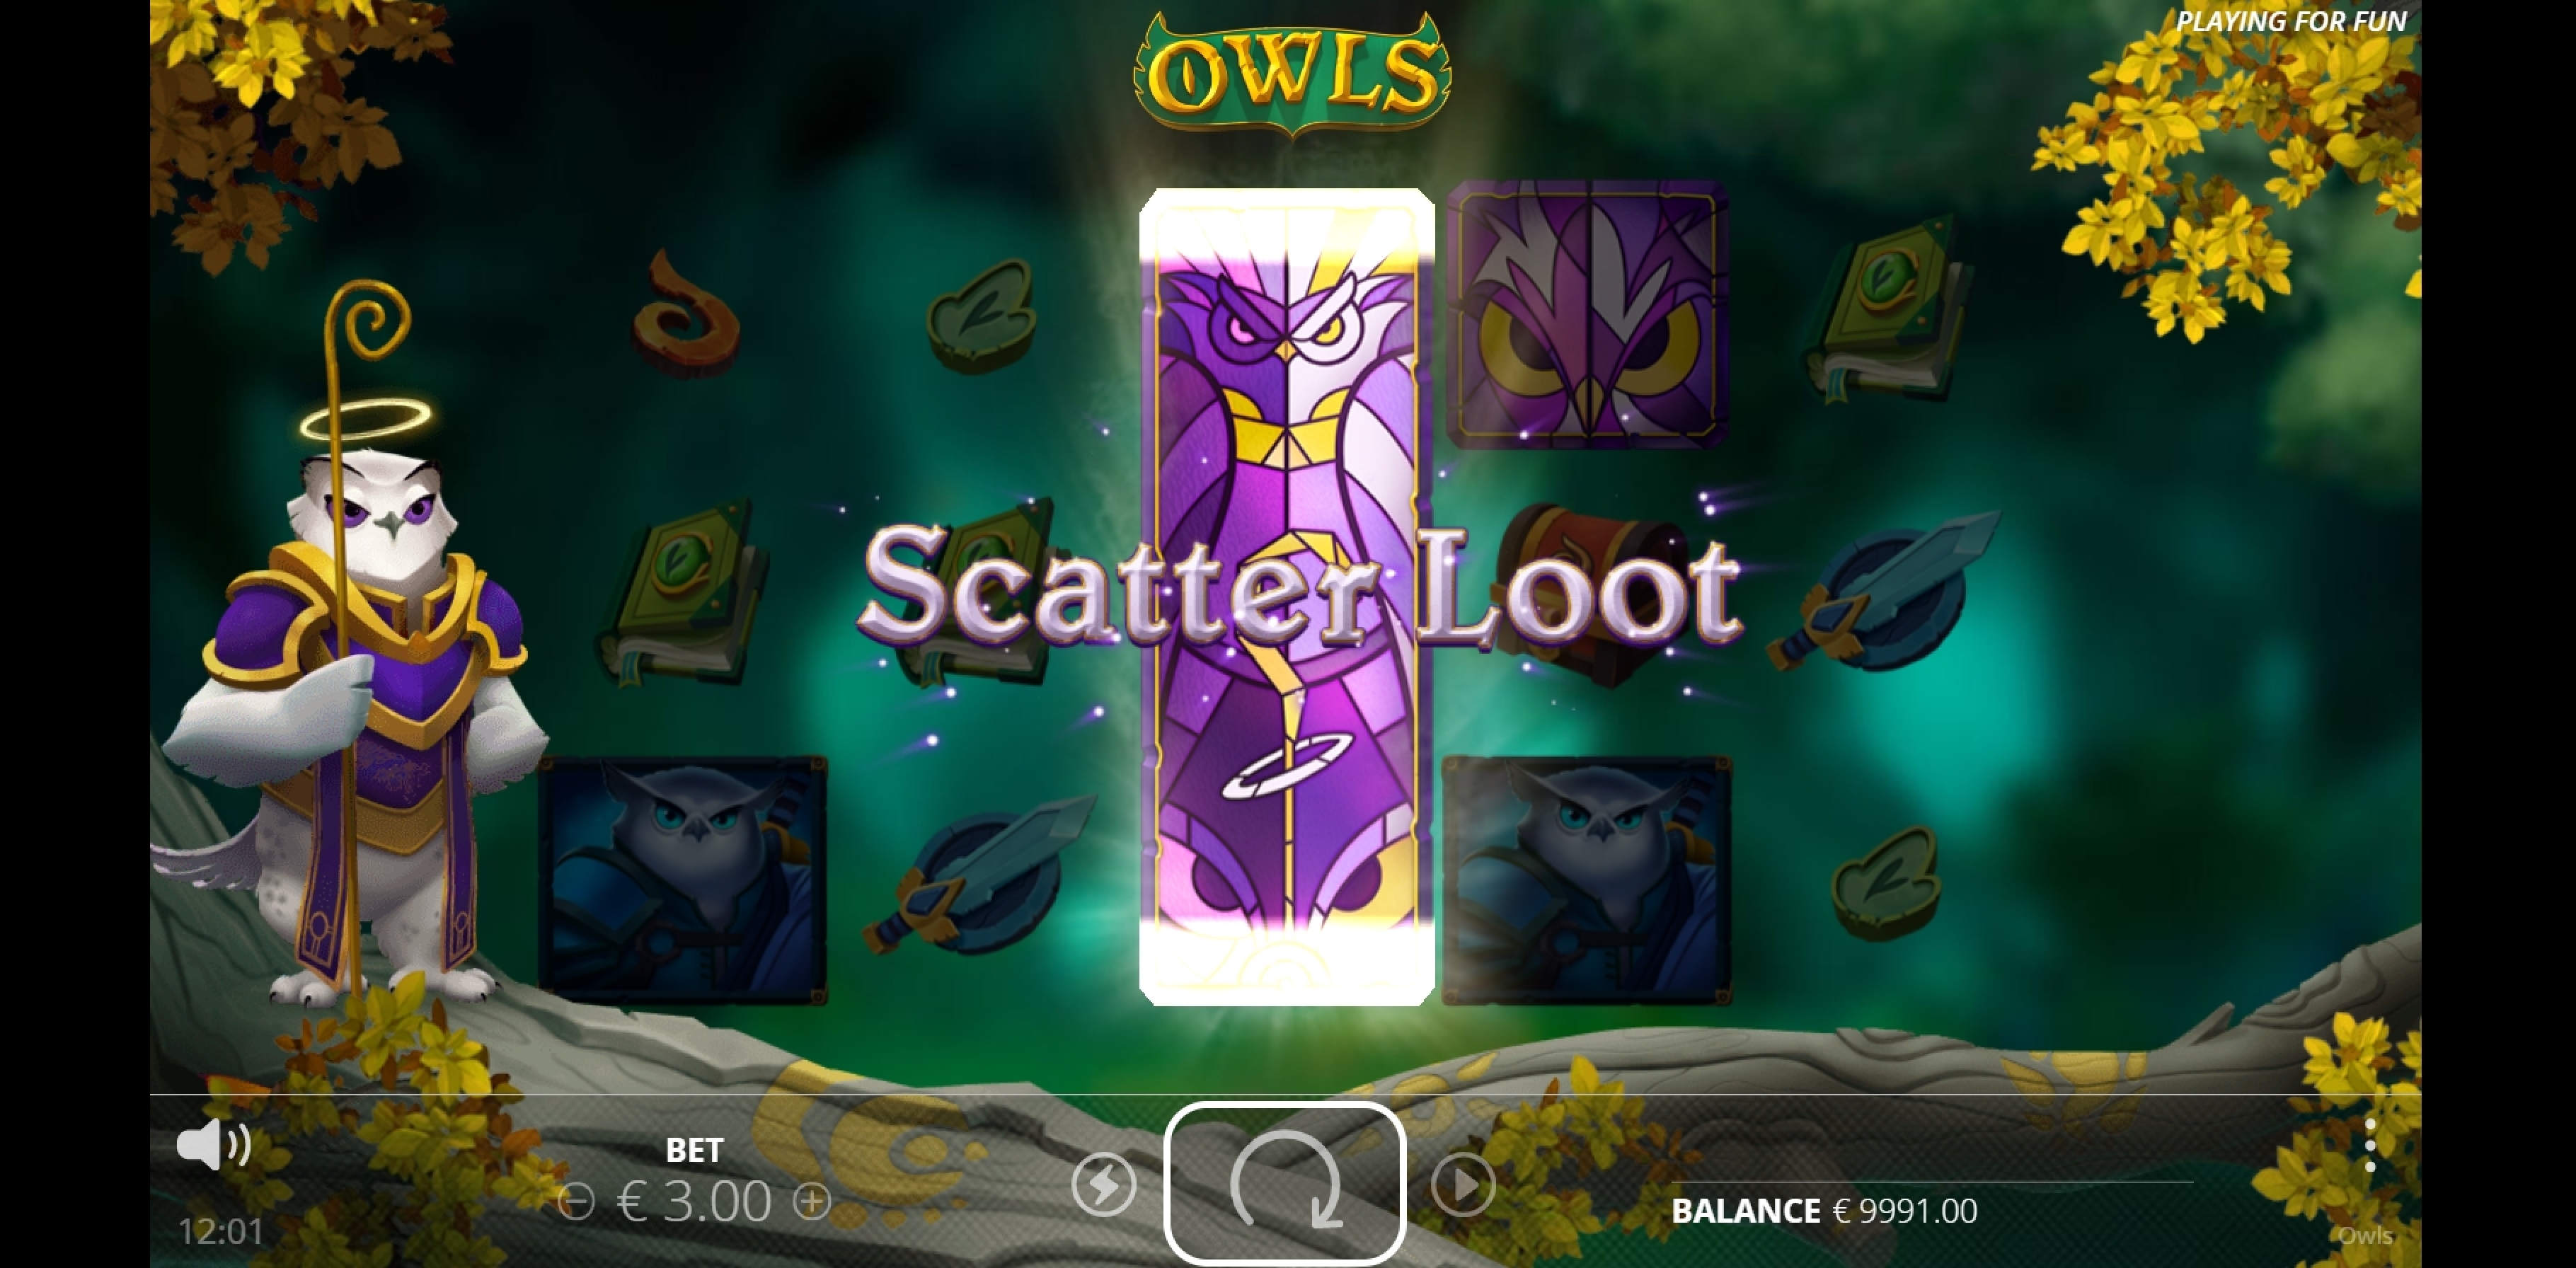 Win Money in Owls Free Slot Game by Nolimit City